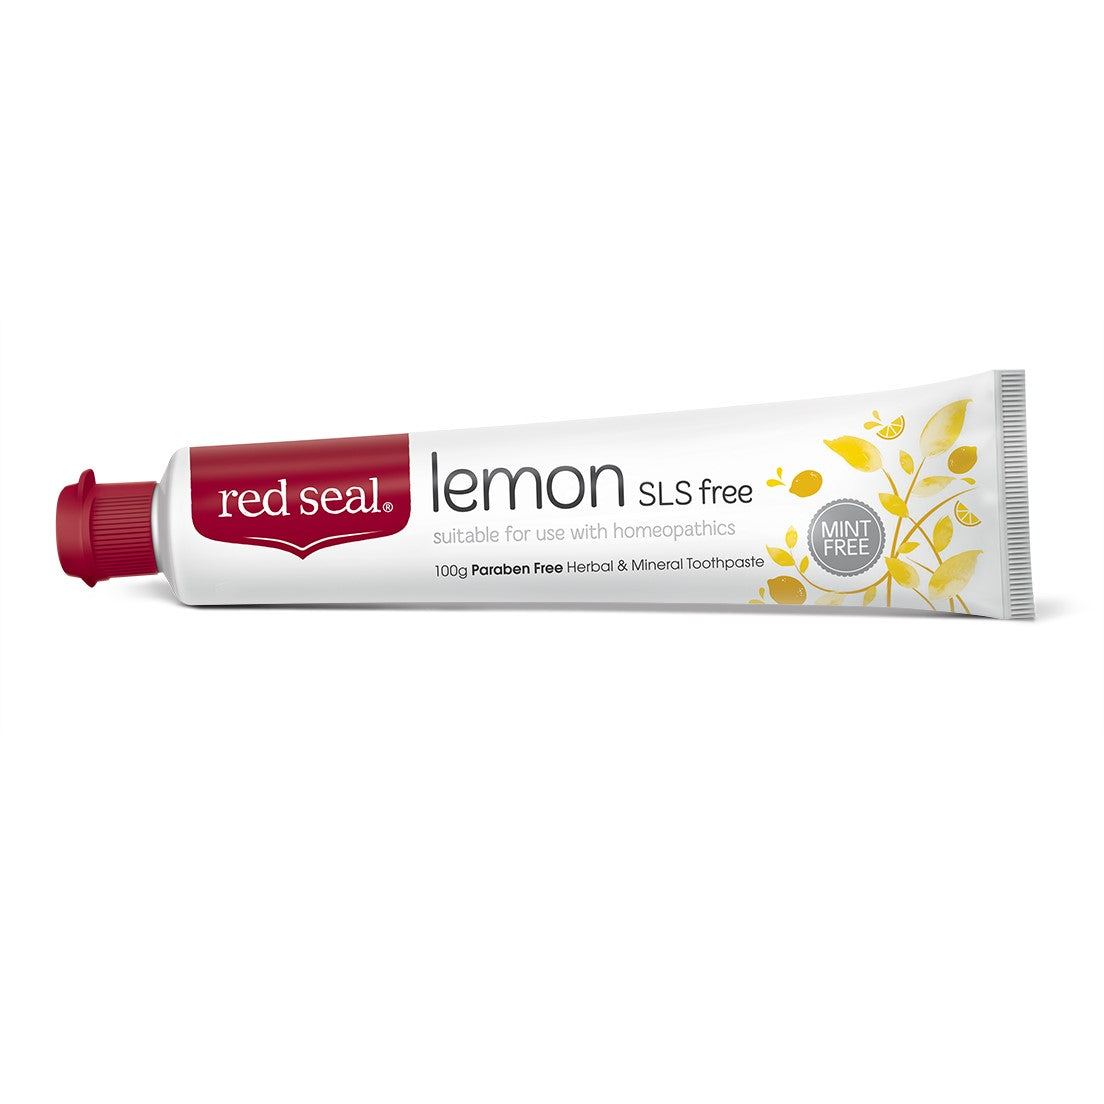 Red Seal Toothpaste 100g, Lemon Flavour; SLS & Mint Free